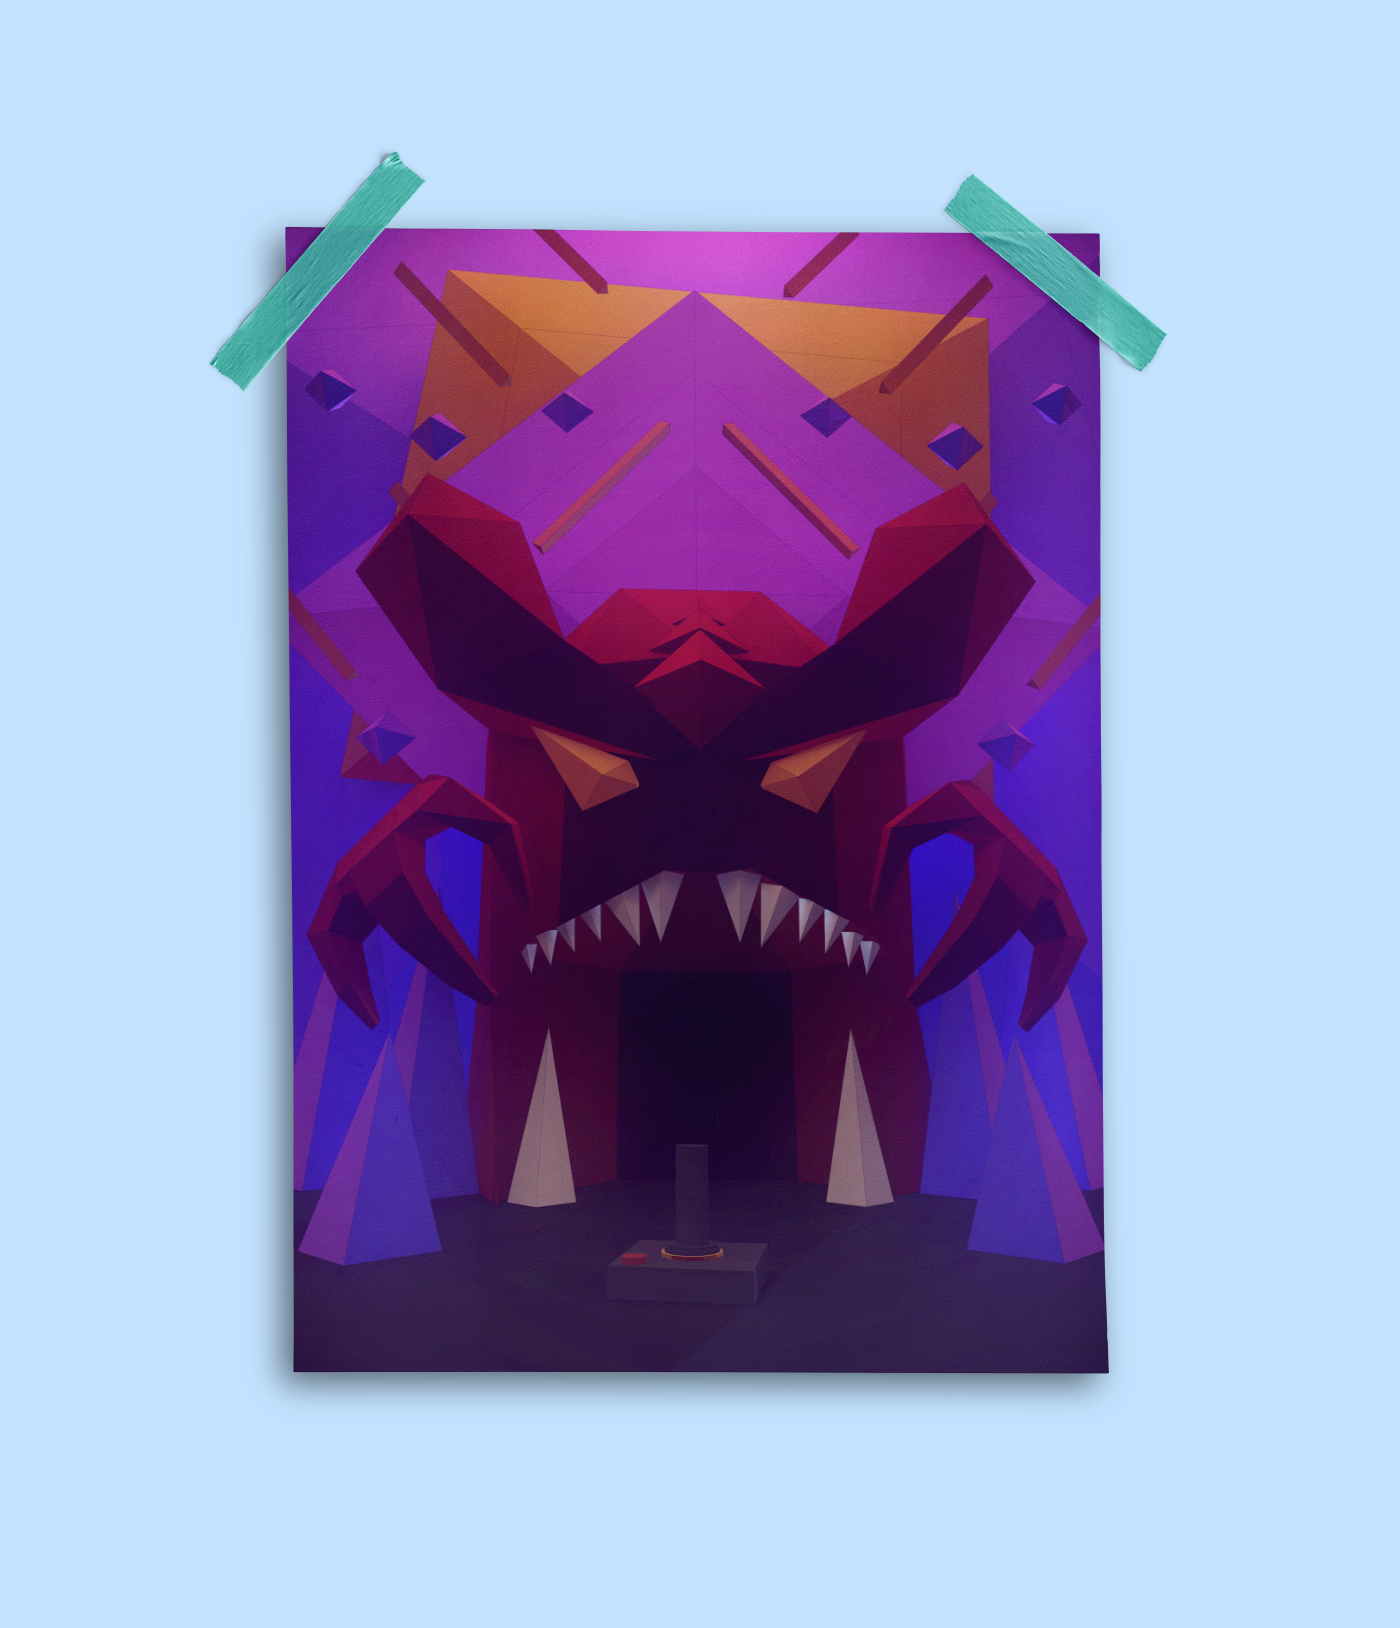 video game magazine Low Poly 3D illustration editorial